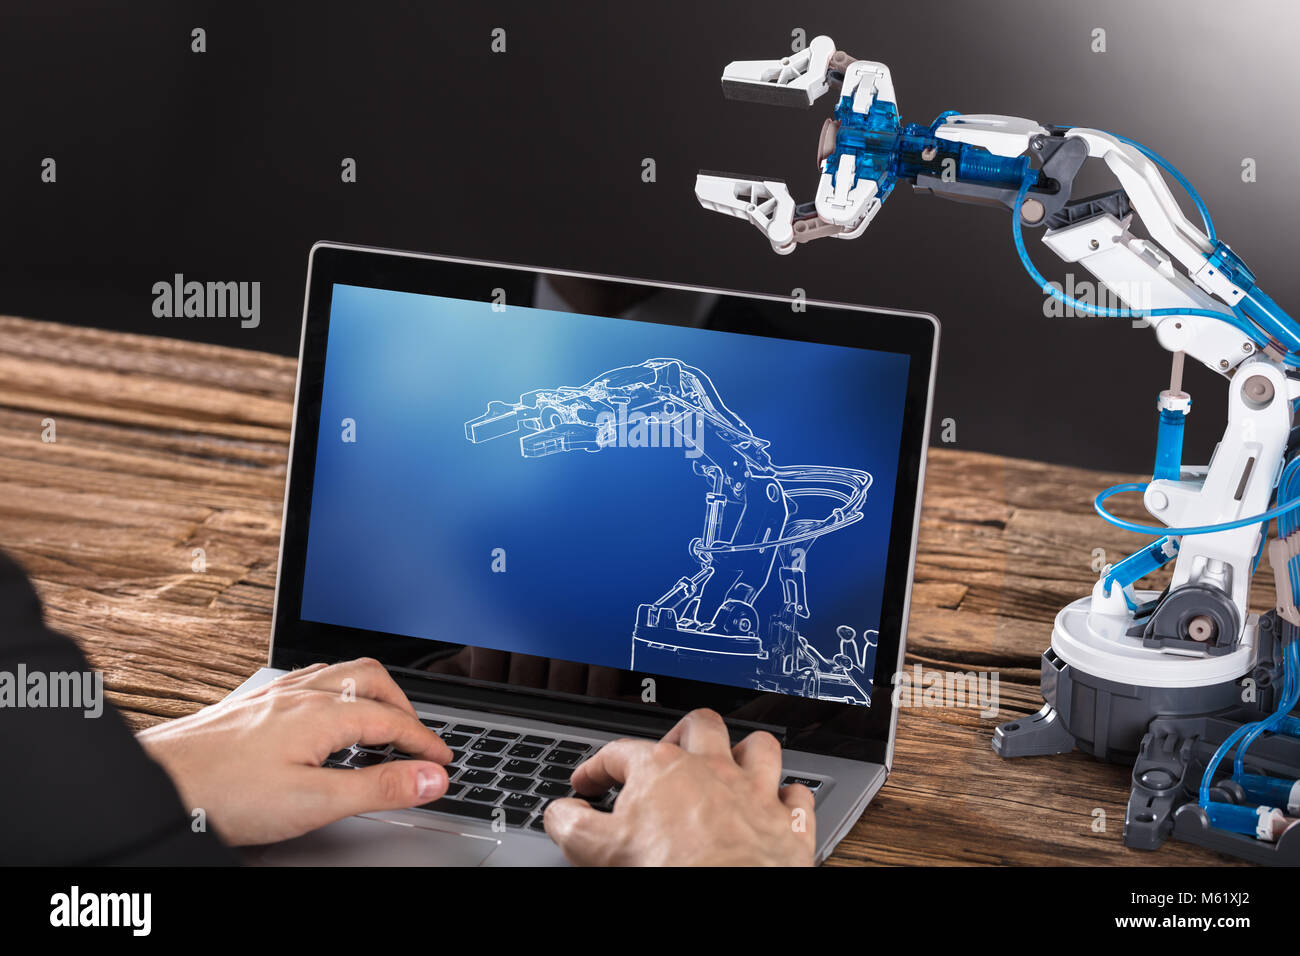 Close-up Of Businessperson Working On Design Of Industrial Robot Arm On Laptop Stock Photo